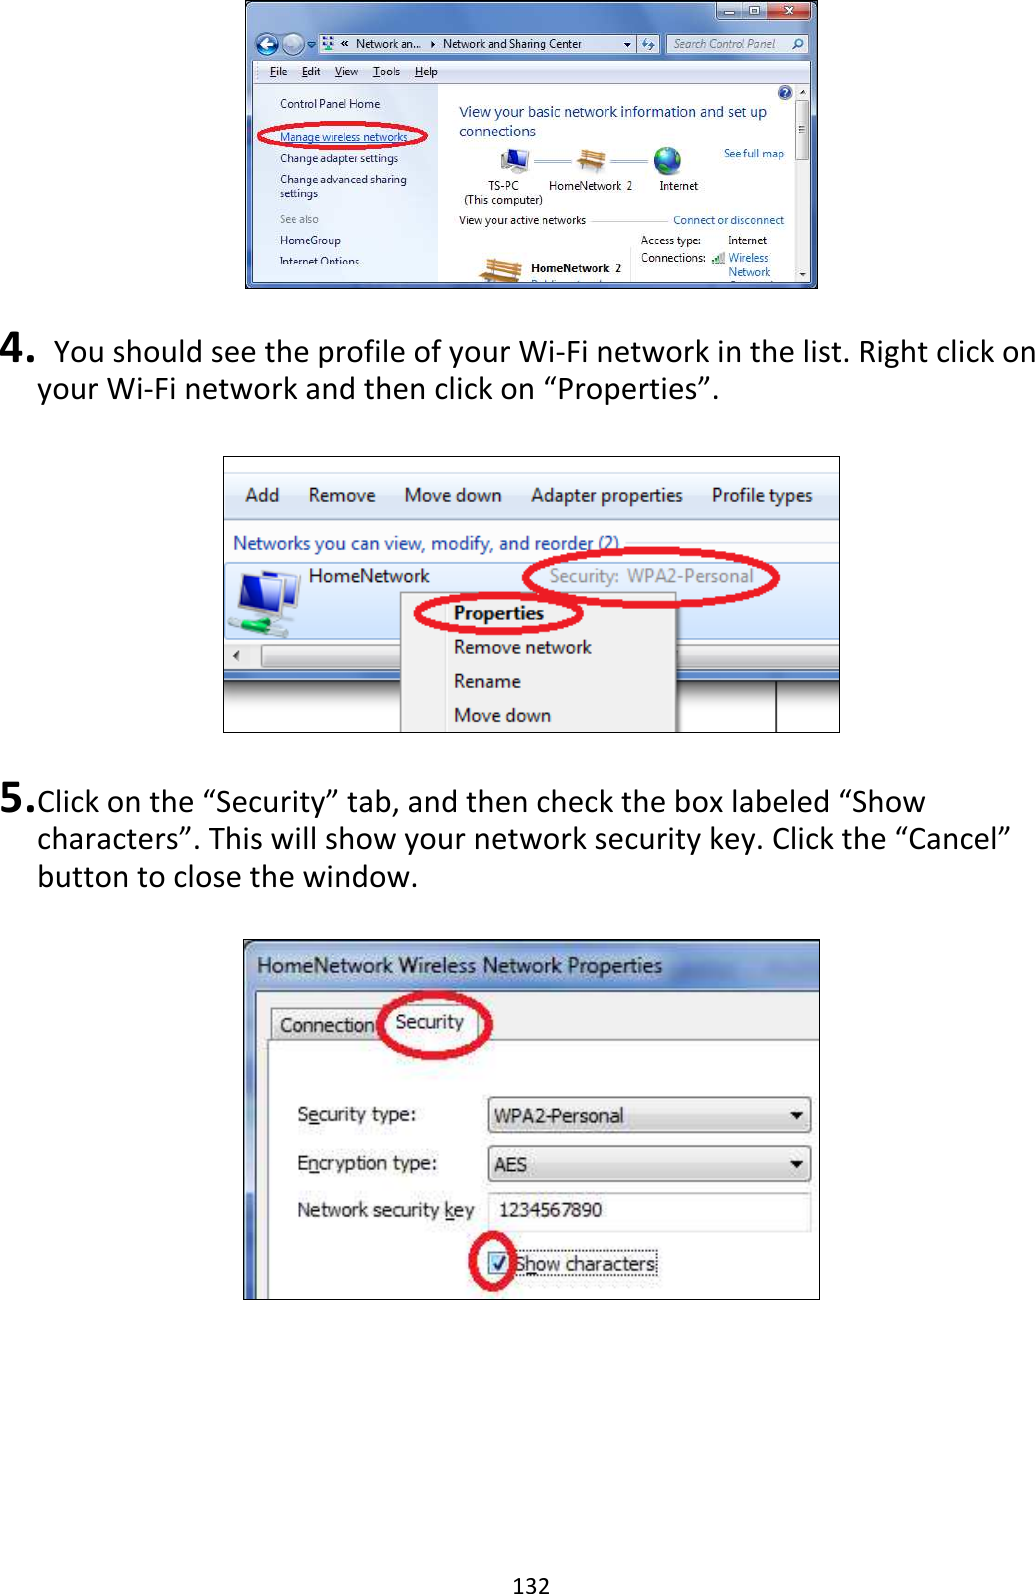 132   4.   You should see the profile of your Wi-Fi network in the list. Right click on your Wi-Fi network and then click on “Properties”.    5. Click on the “Security” tab, and then check the box labeled “Show characters”. This will show your network security key. Click the “Cancel” button to close the window.   